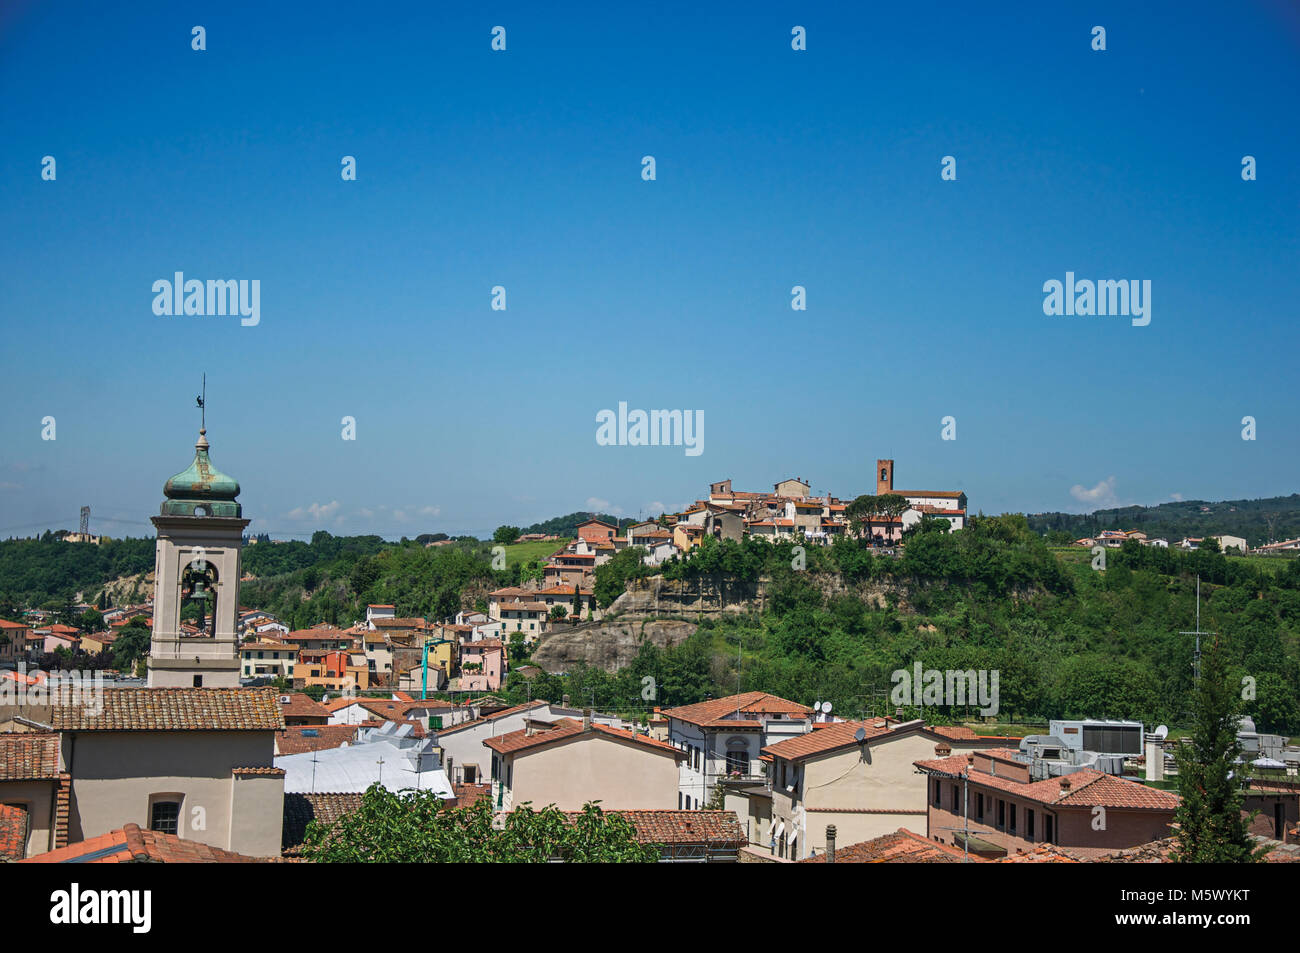 Montelupo Fiorentino High Resolution Stock Photography and Images - Alamy